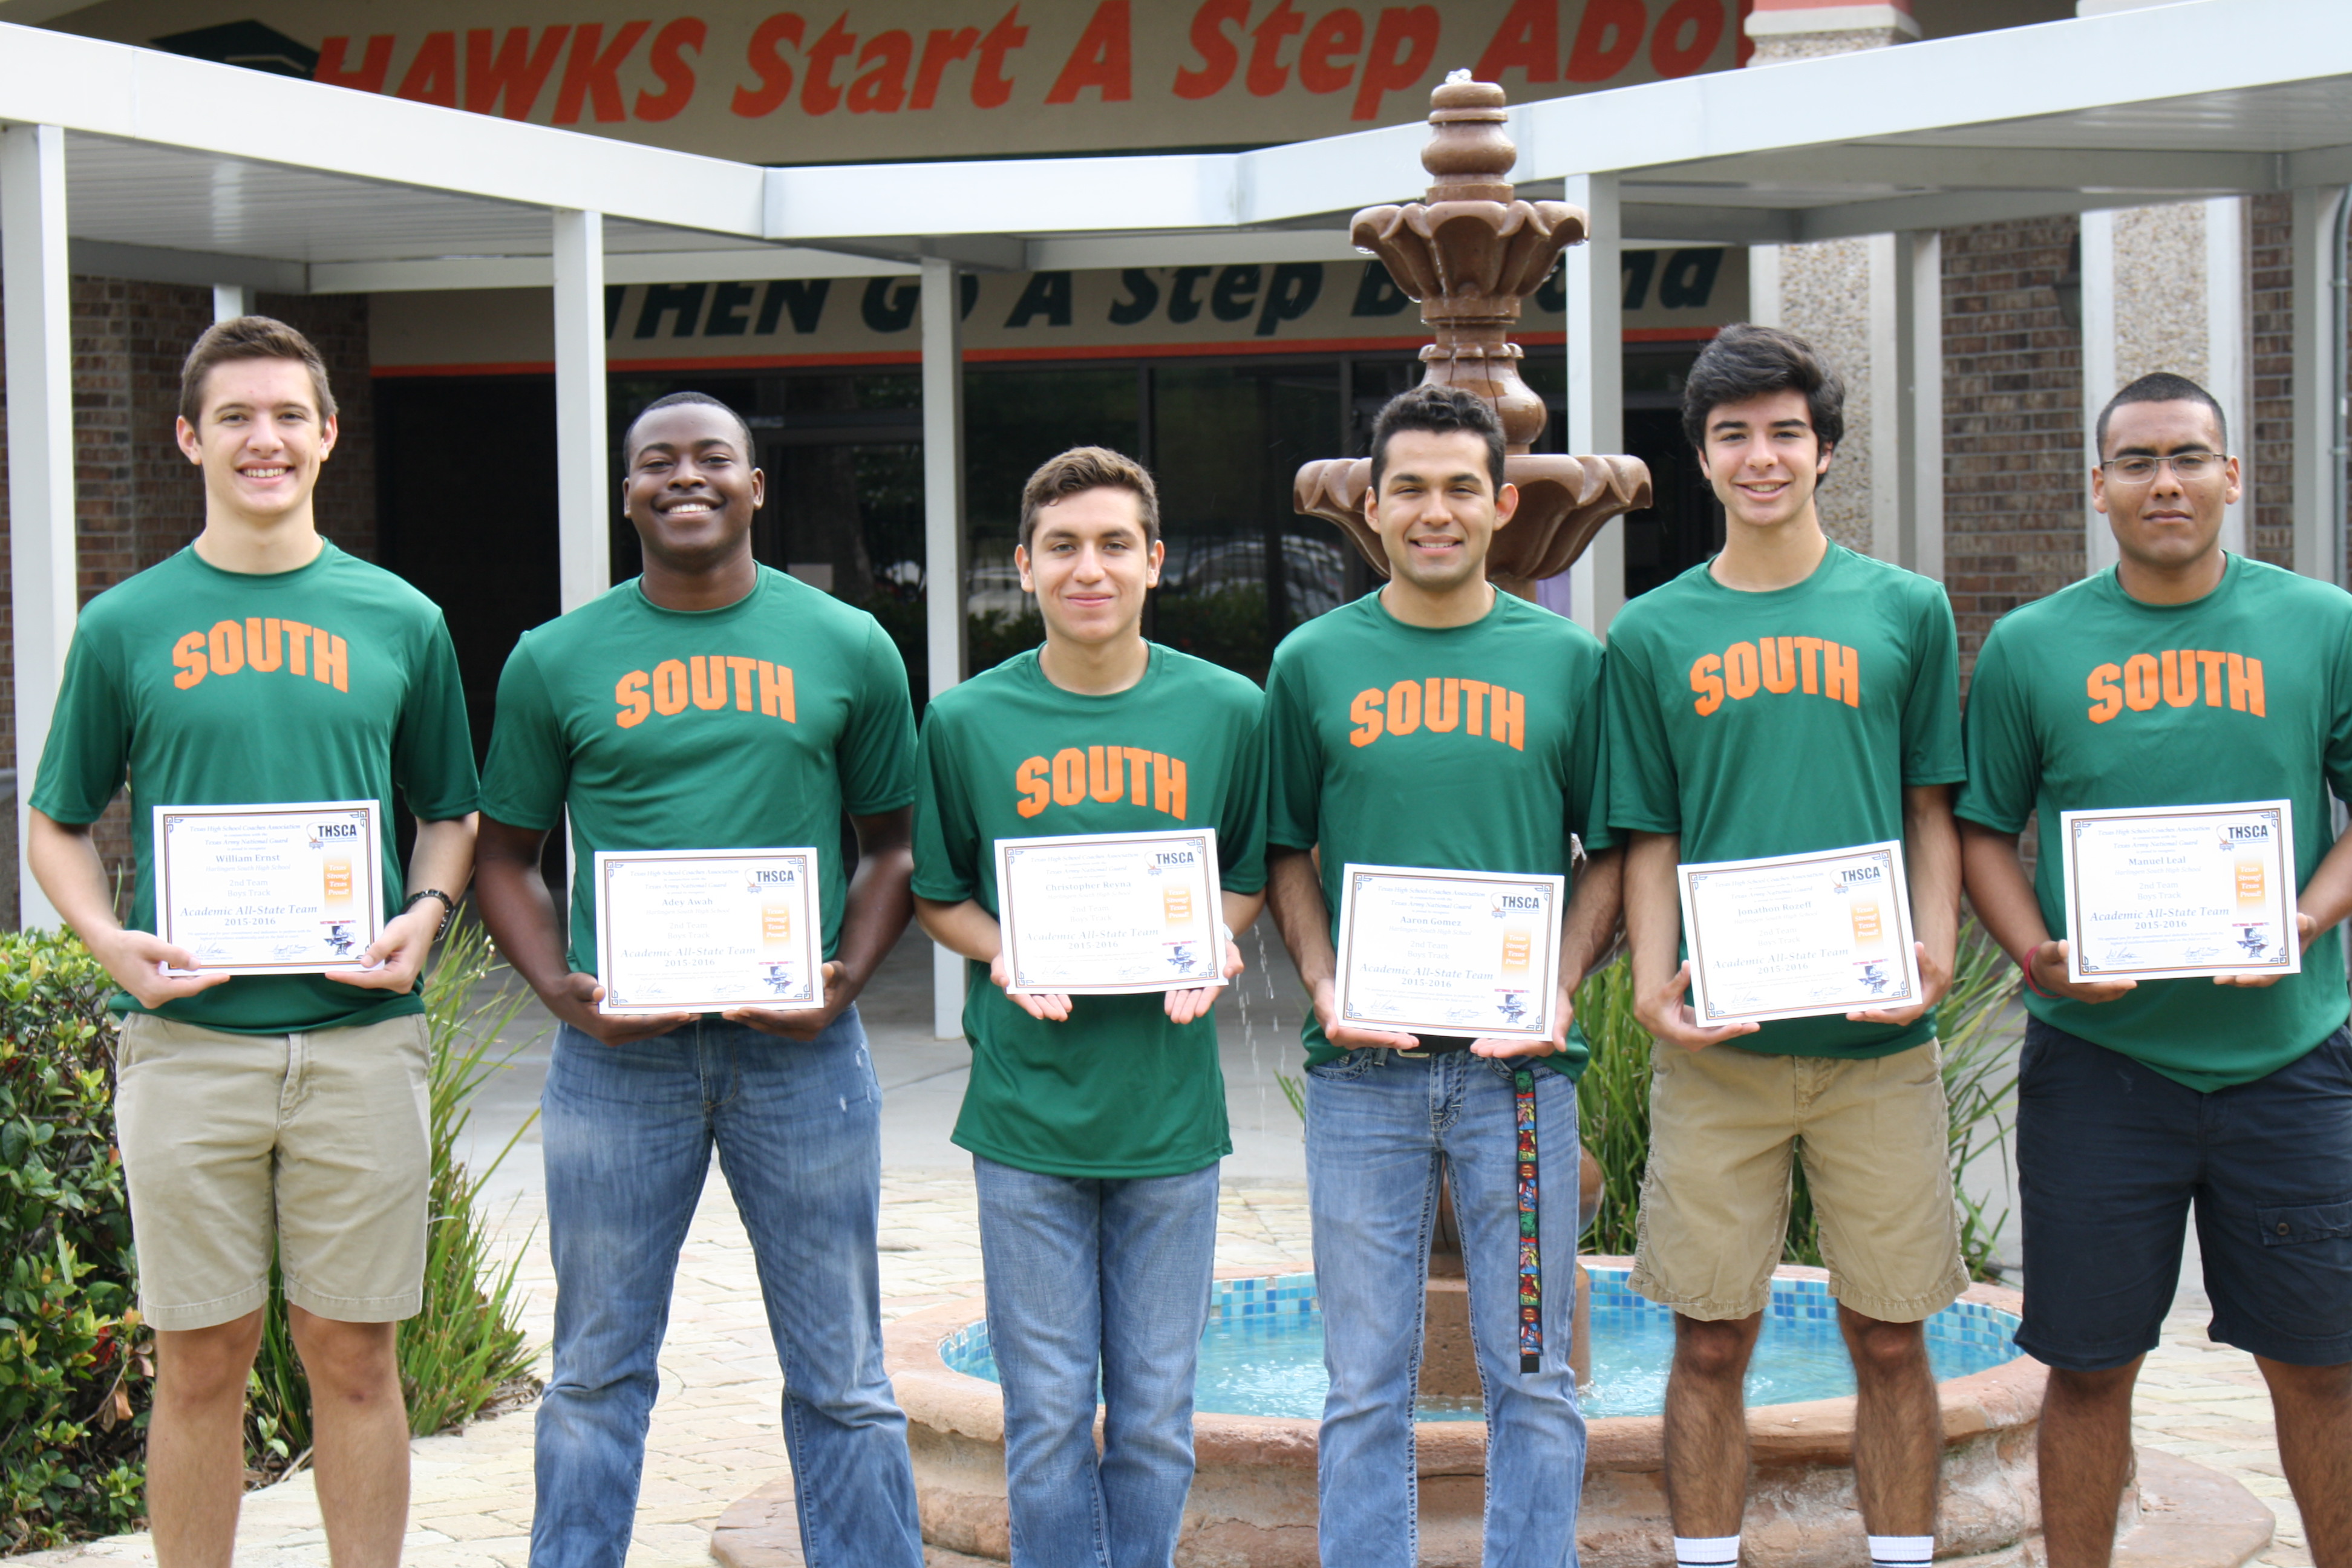 South Track and Field students named to Academic All-State Team